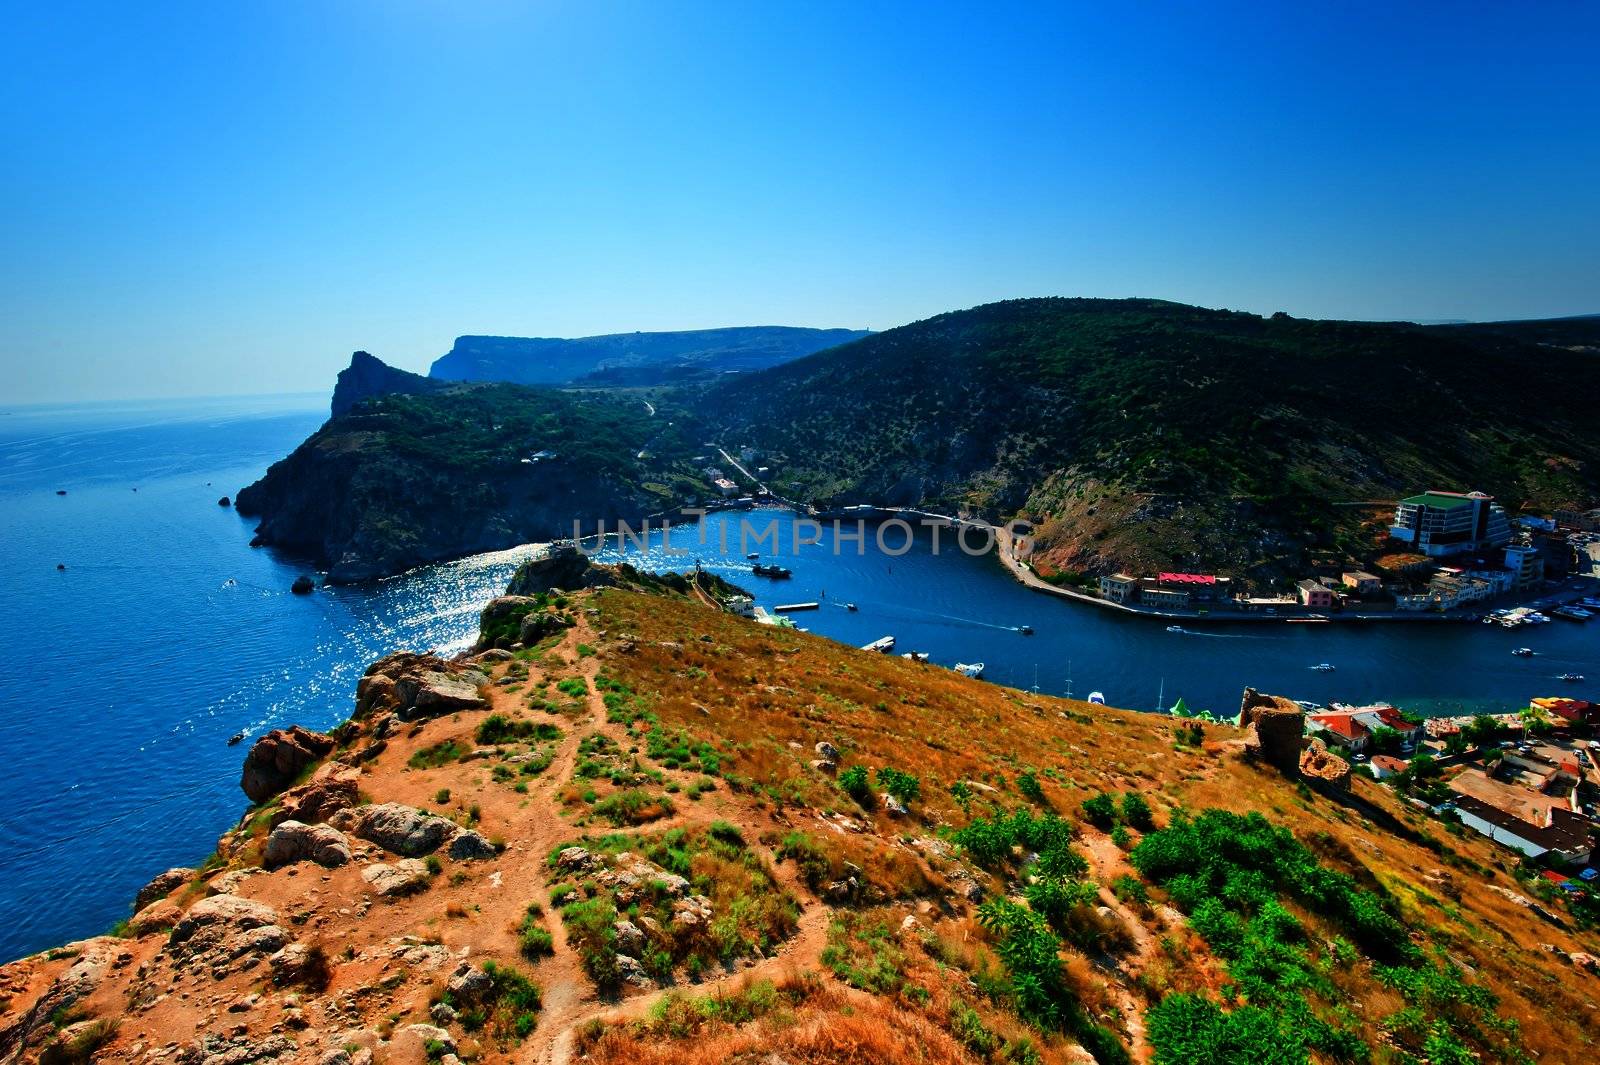 View of the entrance to the picturesque bay of Balaklava and the remains of the fortress Cembalo